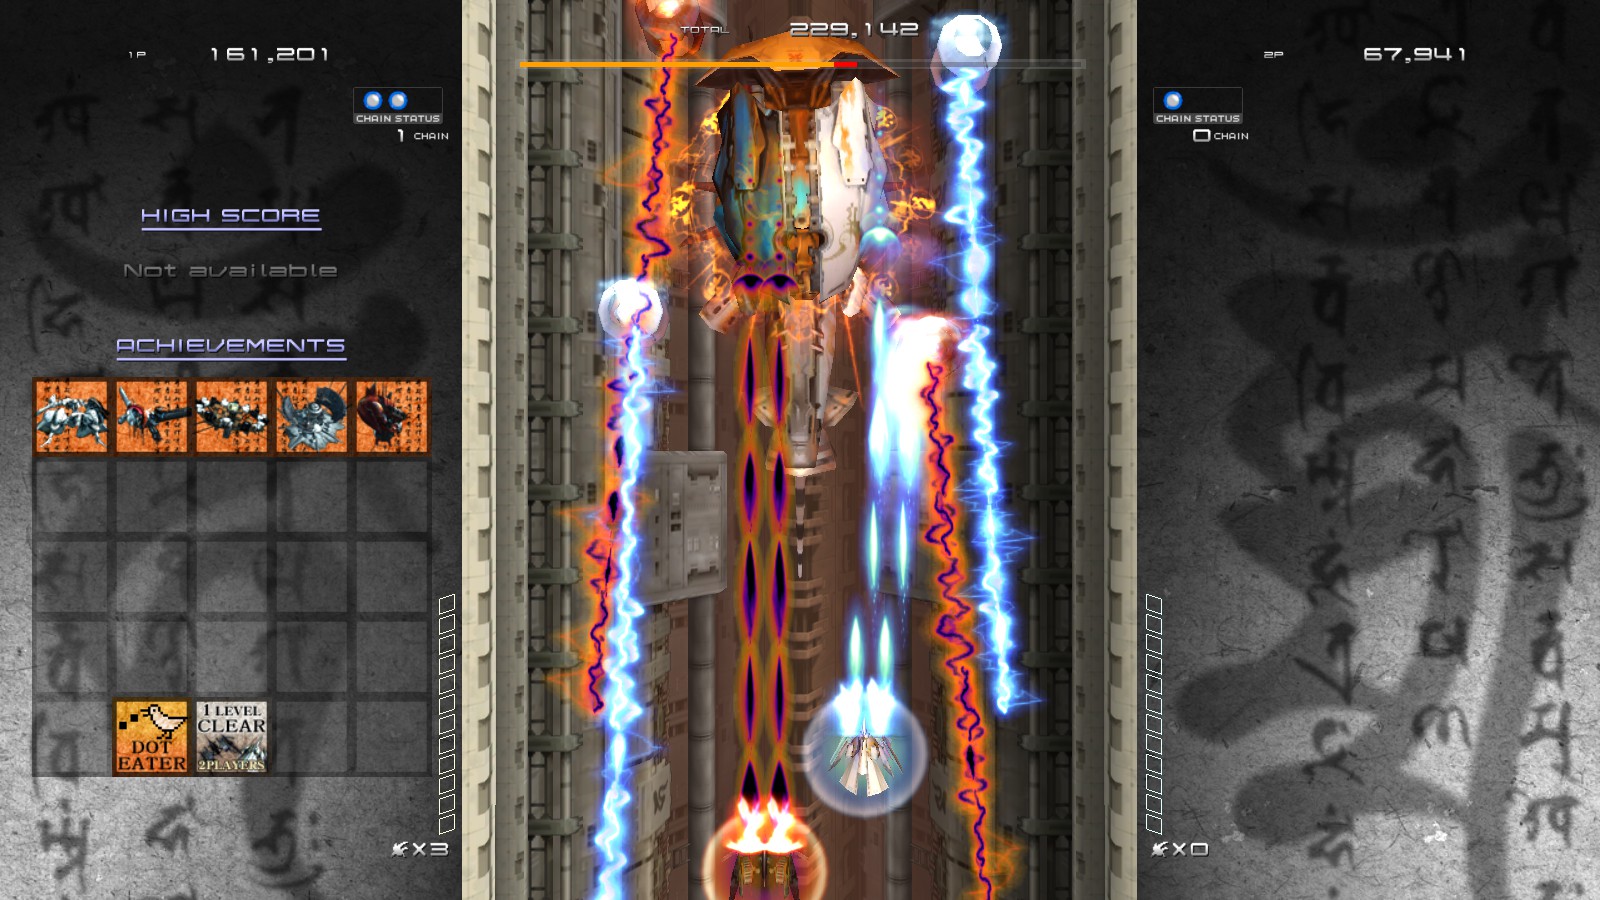 Here is a shot of the intense gameplay in Ikaruga